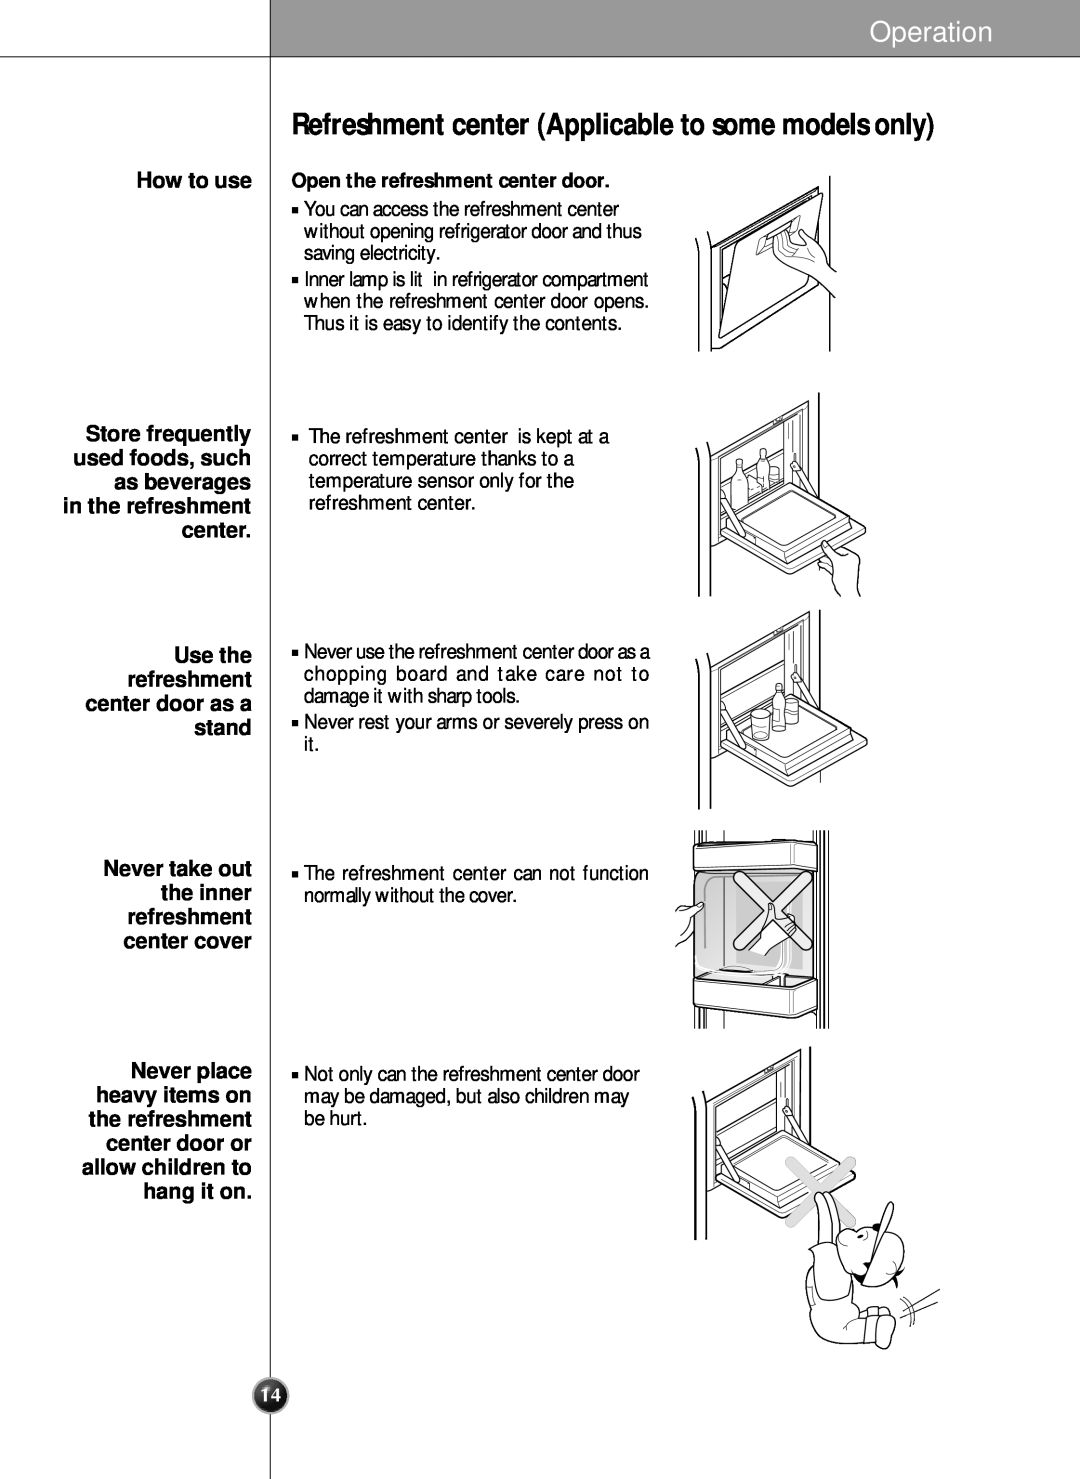 LG Electronics SXS manual How to use, as beverages in the refreshment center Use the refreshment, center door as a stand 